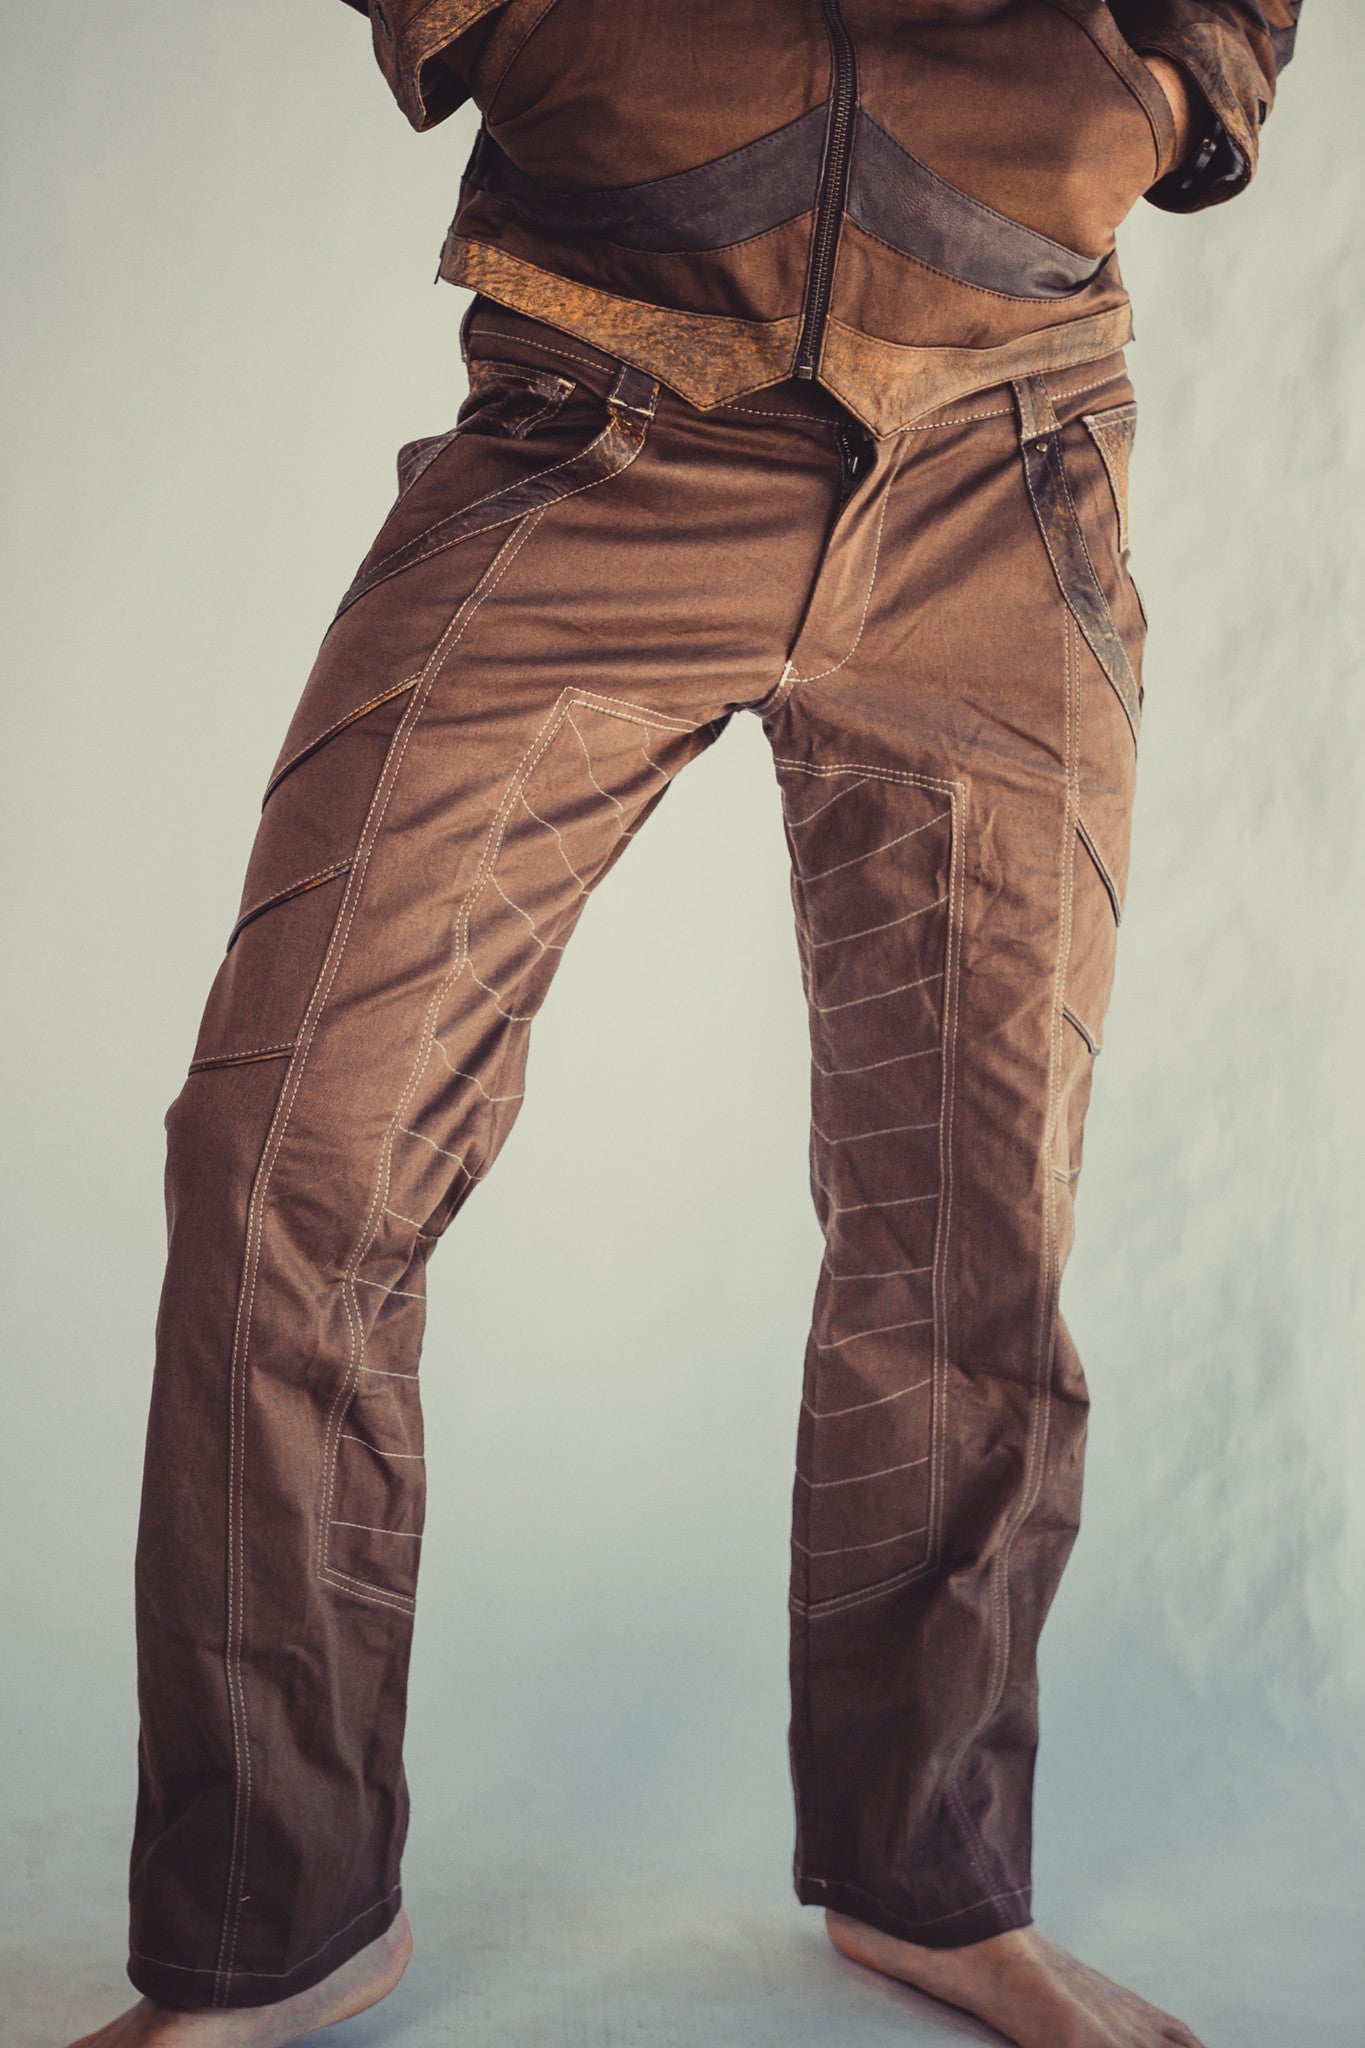 Vintage Lace up Women's Real Leather Biker Motorcycle Brown Trousers Pants  Size W26 L32 - Etsy